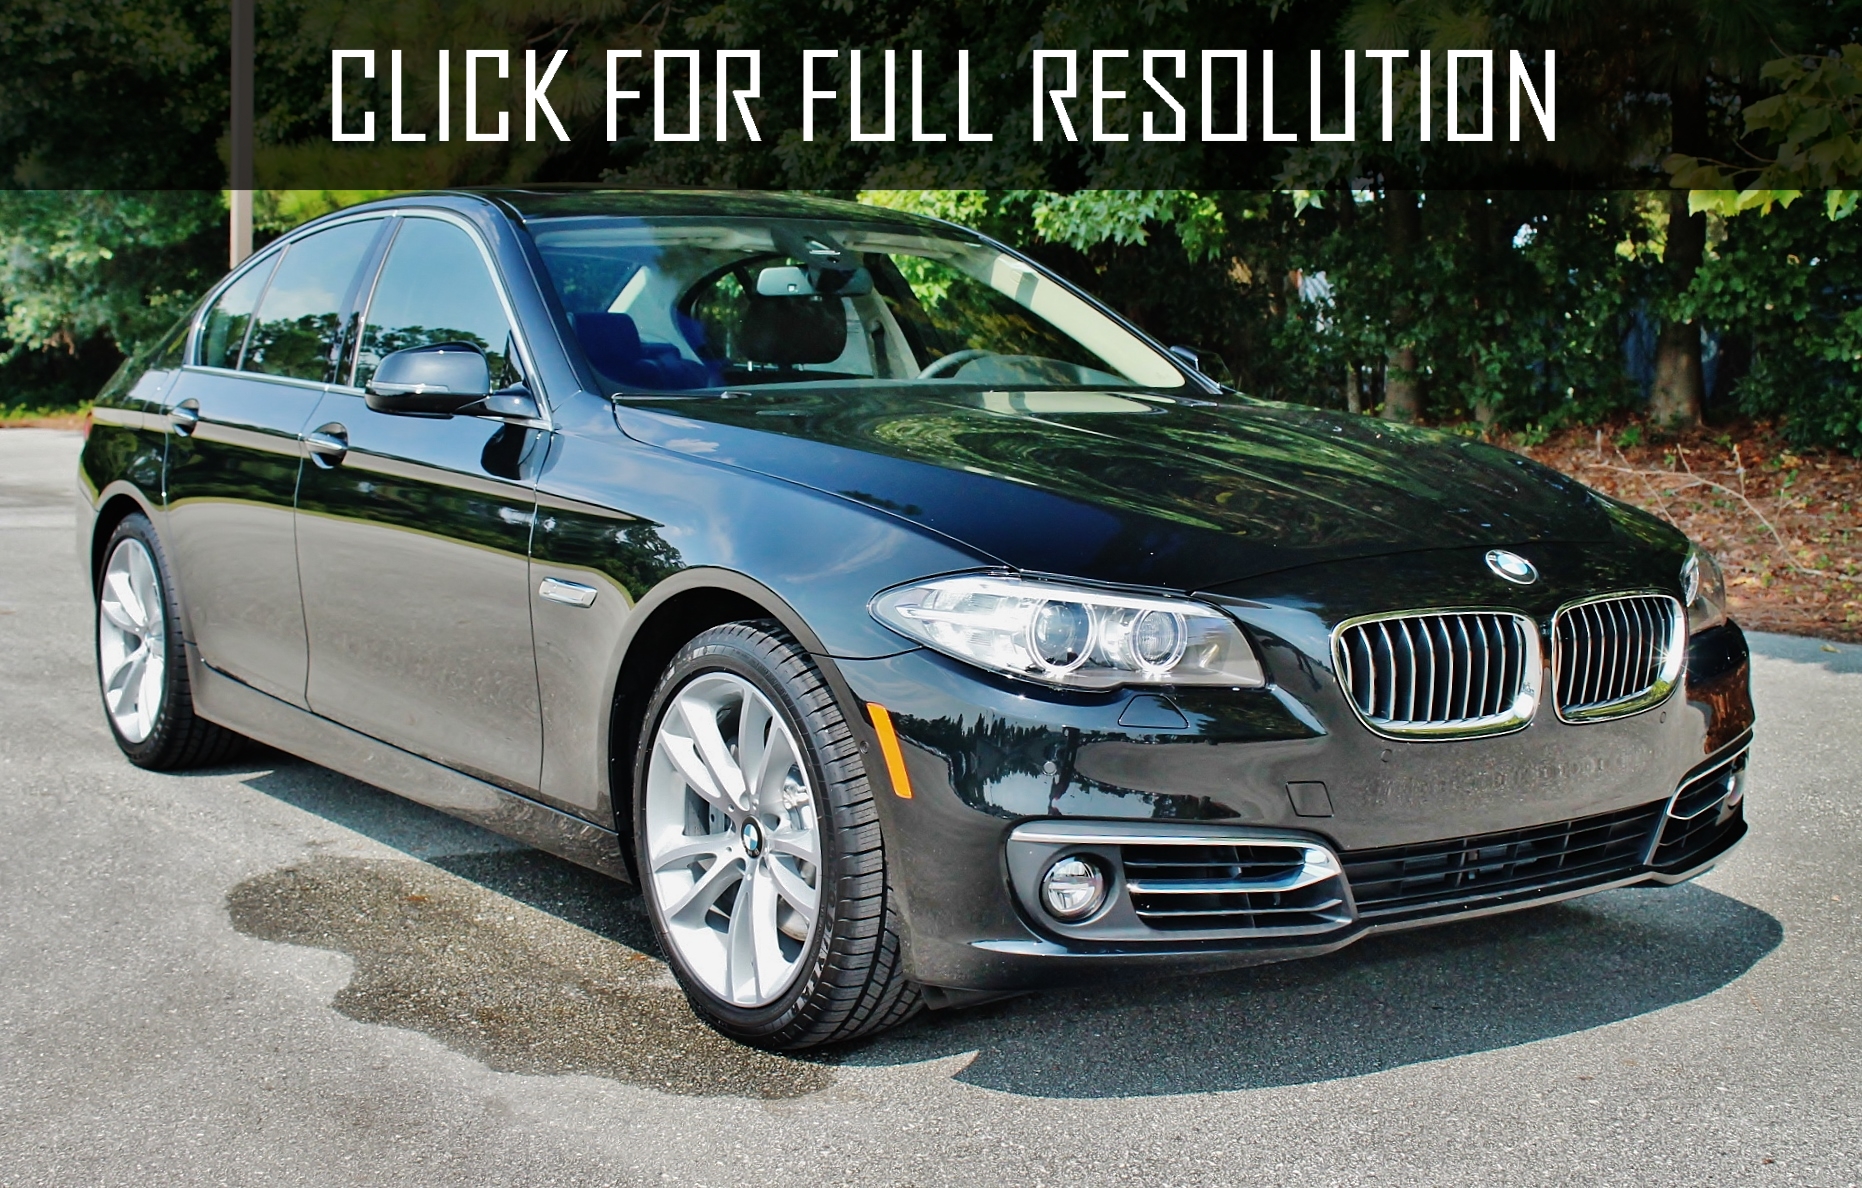 2016 Bmw 535i news, reviews, msrp, ratings with amazing images